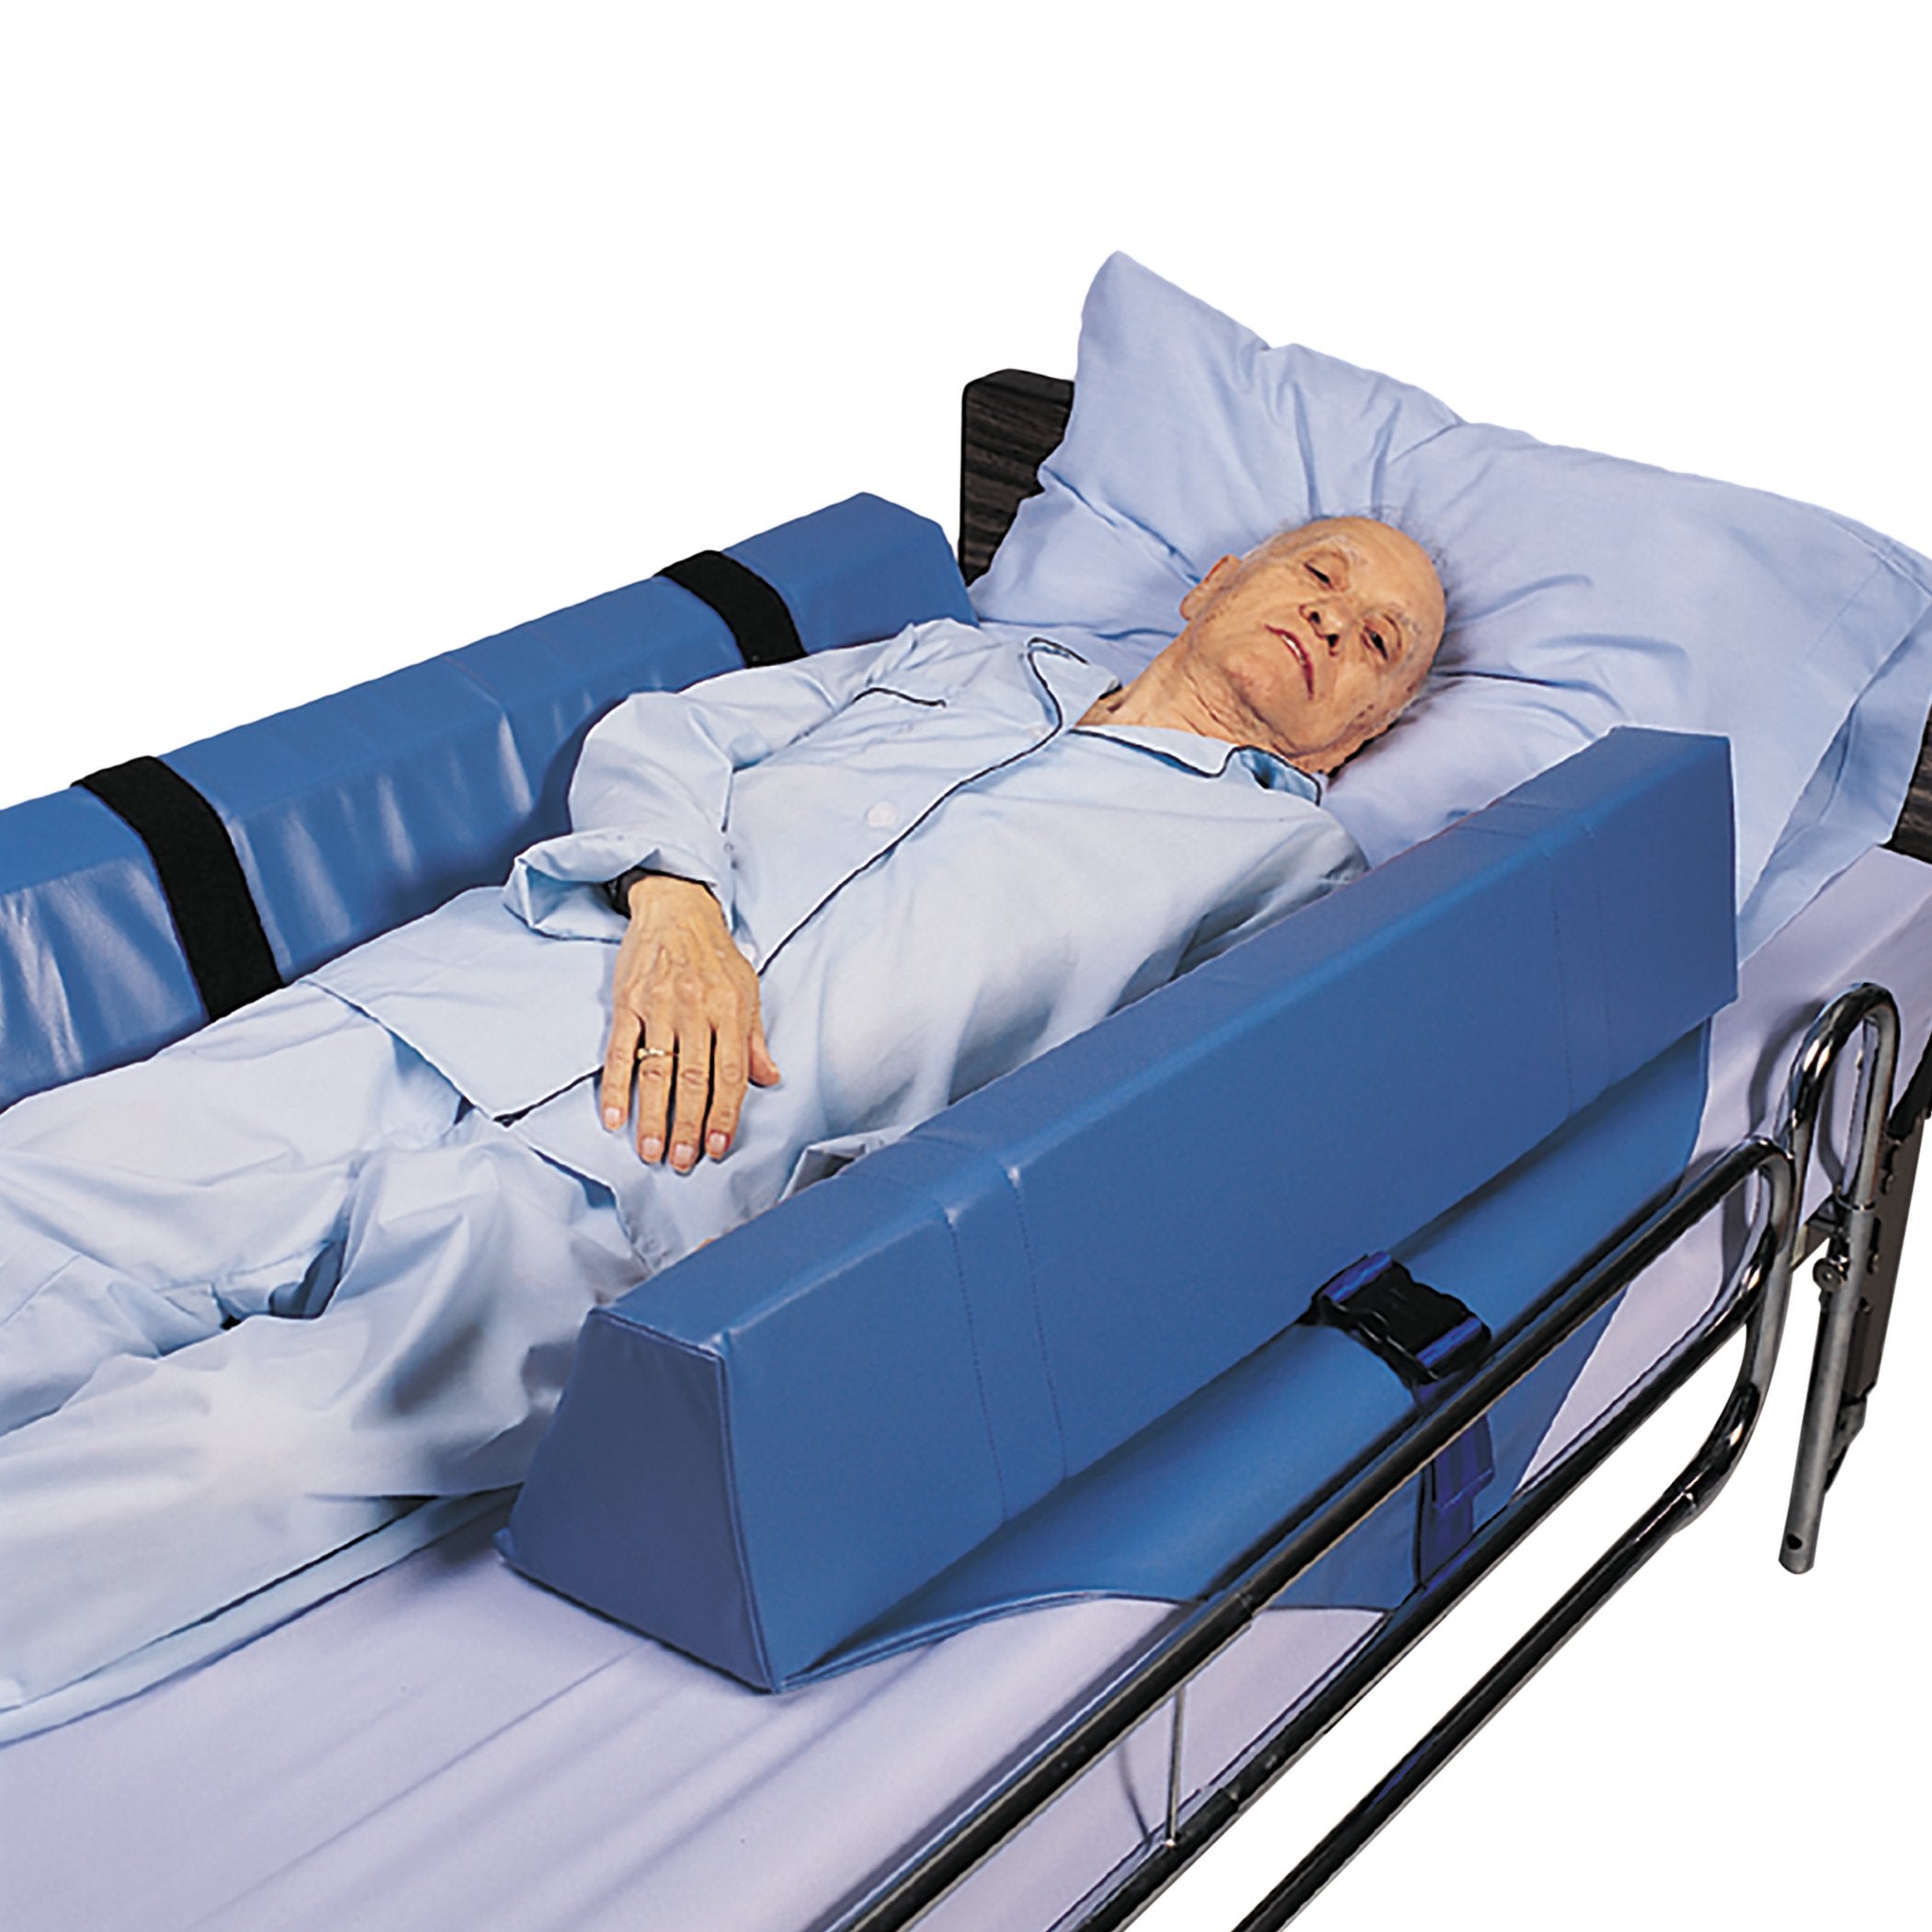 Roll-Control Bed Bolster Skil-Care 34 W X 8 D X 7 H Inch Foam Strap Fastening with Buckle